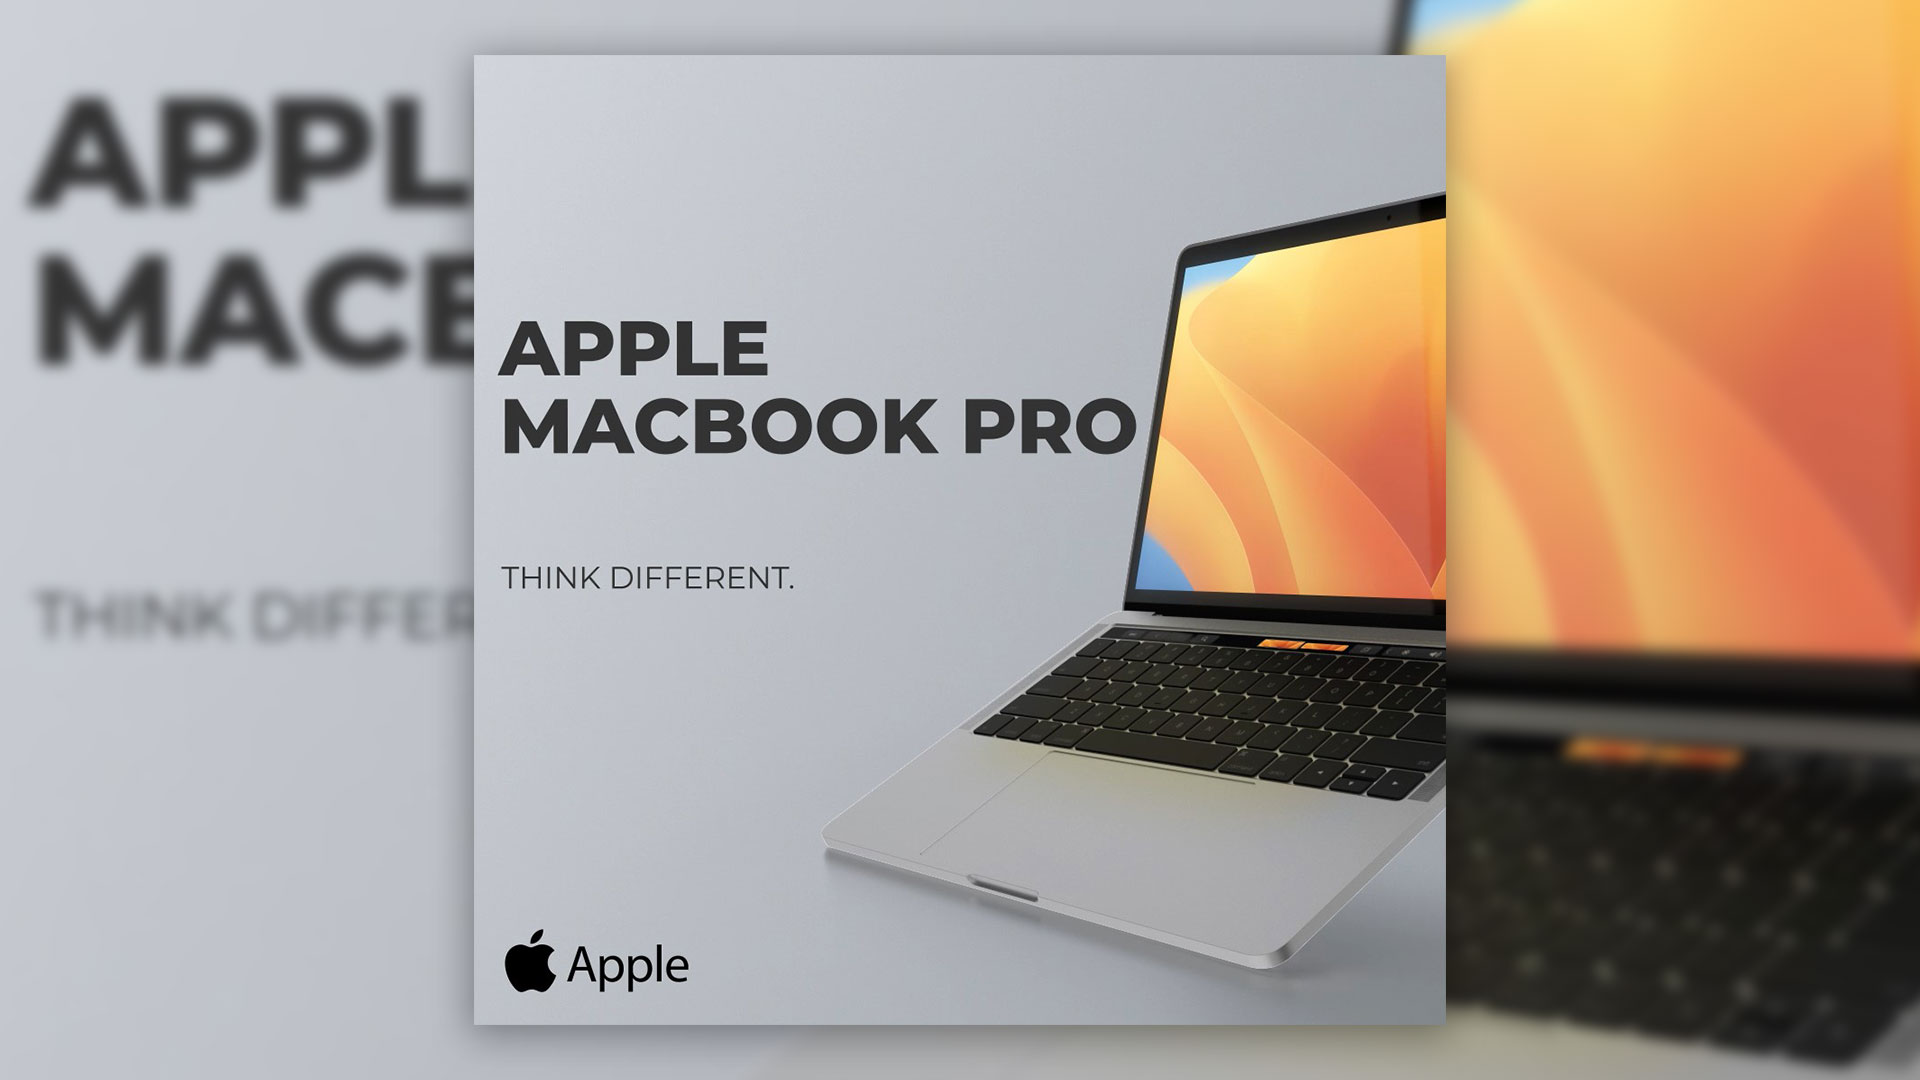 Apple PRODUCT PROMOTION BANNER